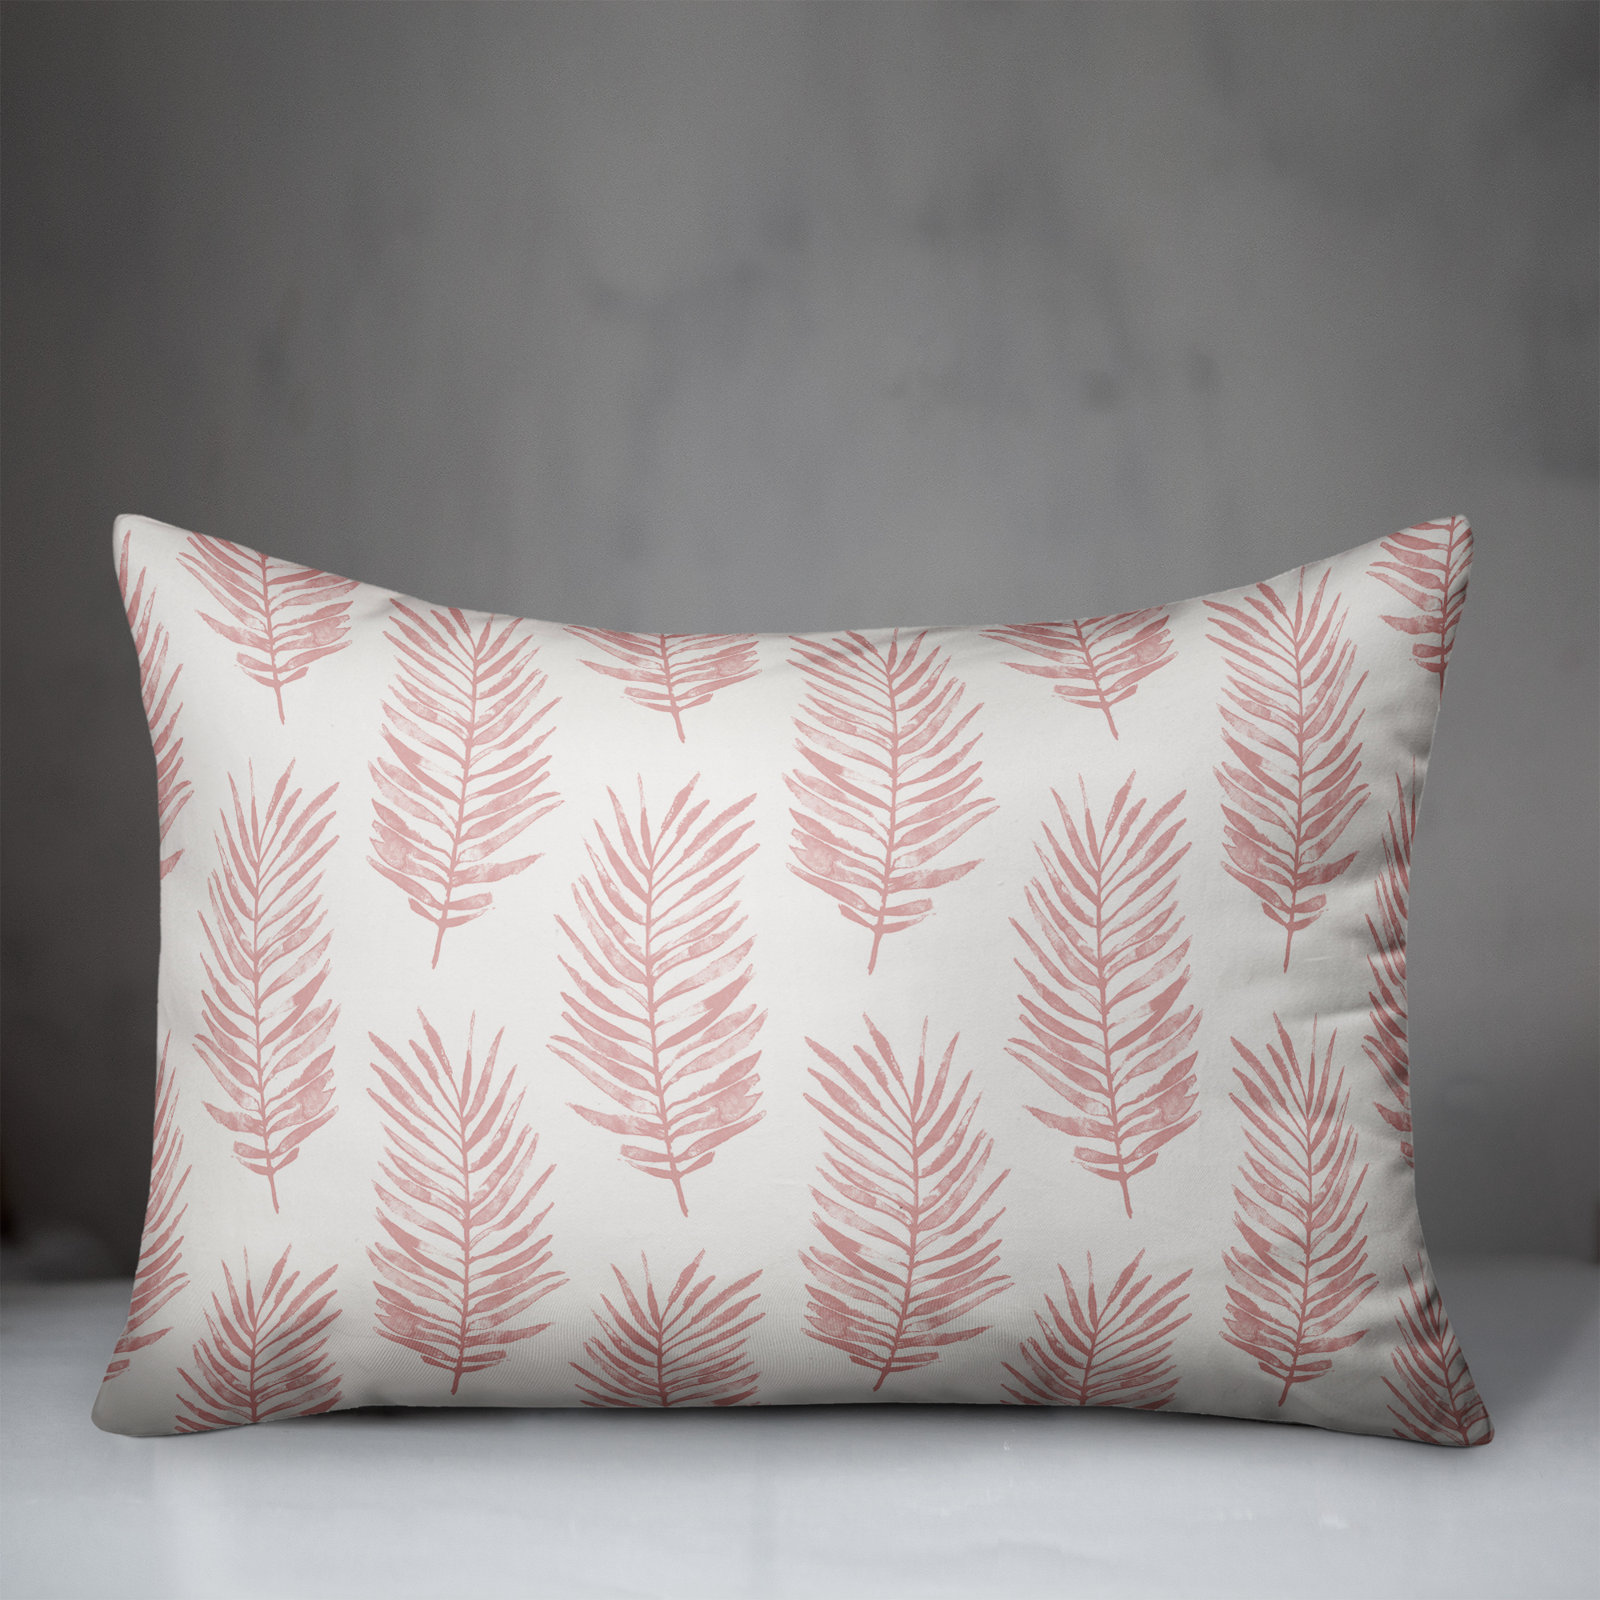 Bay Isle Home Tambo Floral Indoor/Outdoor Throw Pillow